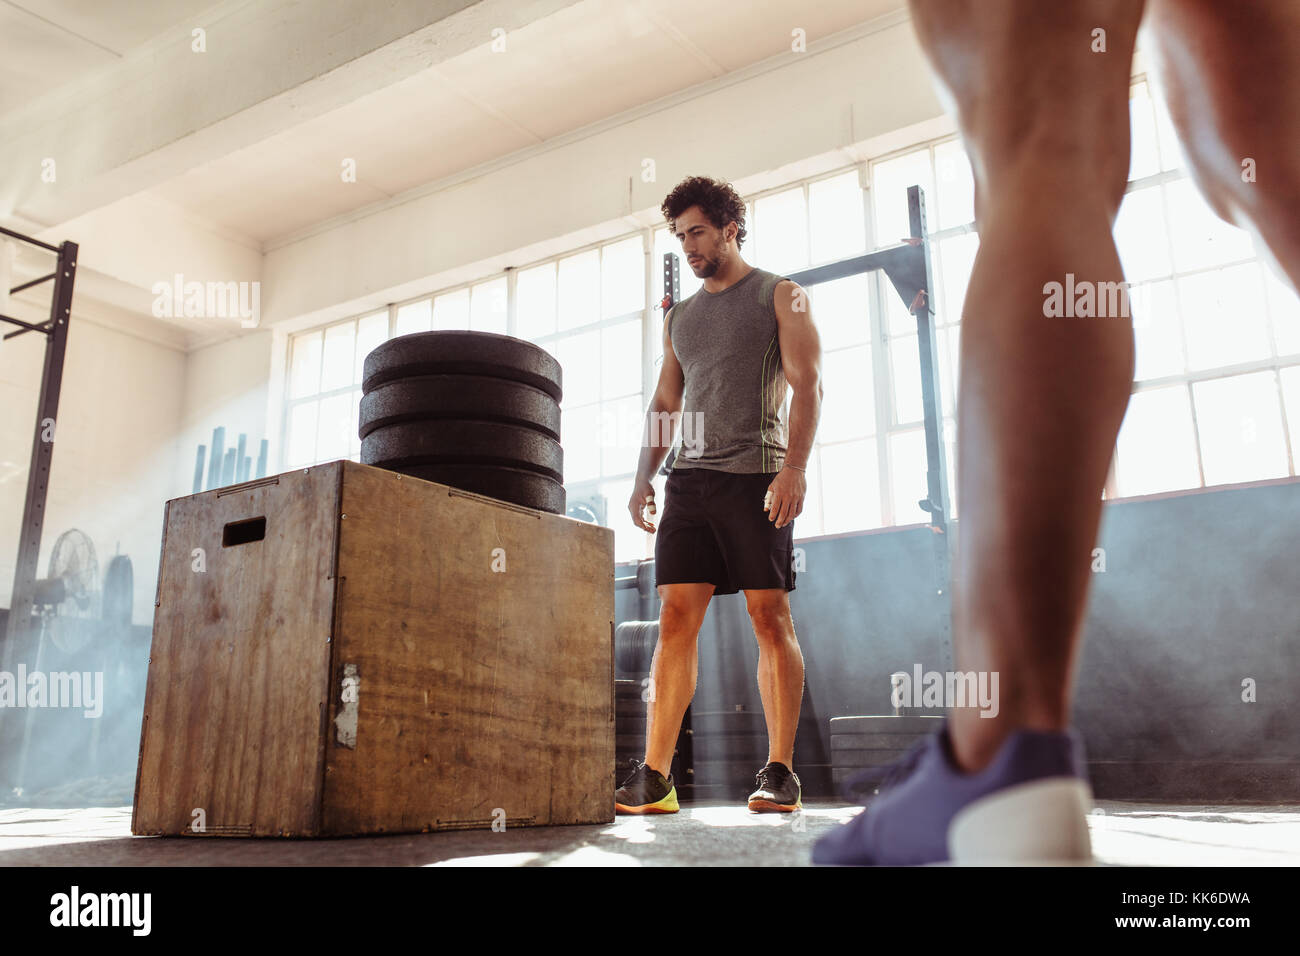 Determined fit man doing box jumping in health club. Muscular male athlete standing by wooden box with extra height made by pile of weights. Stock Photo